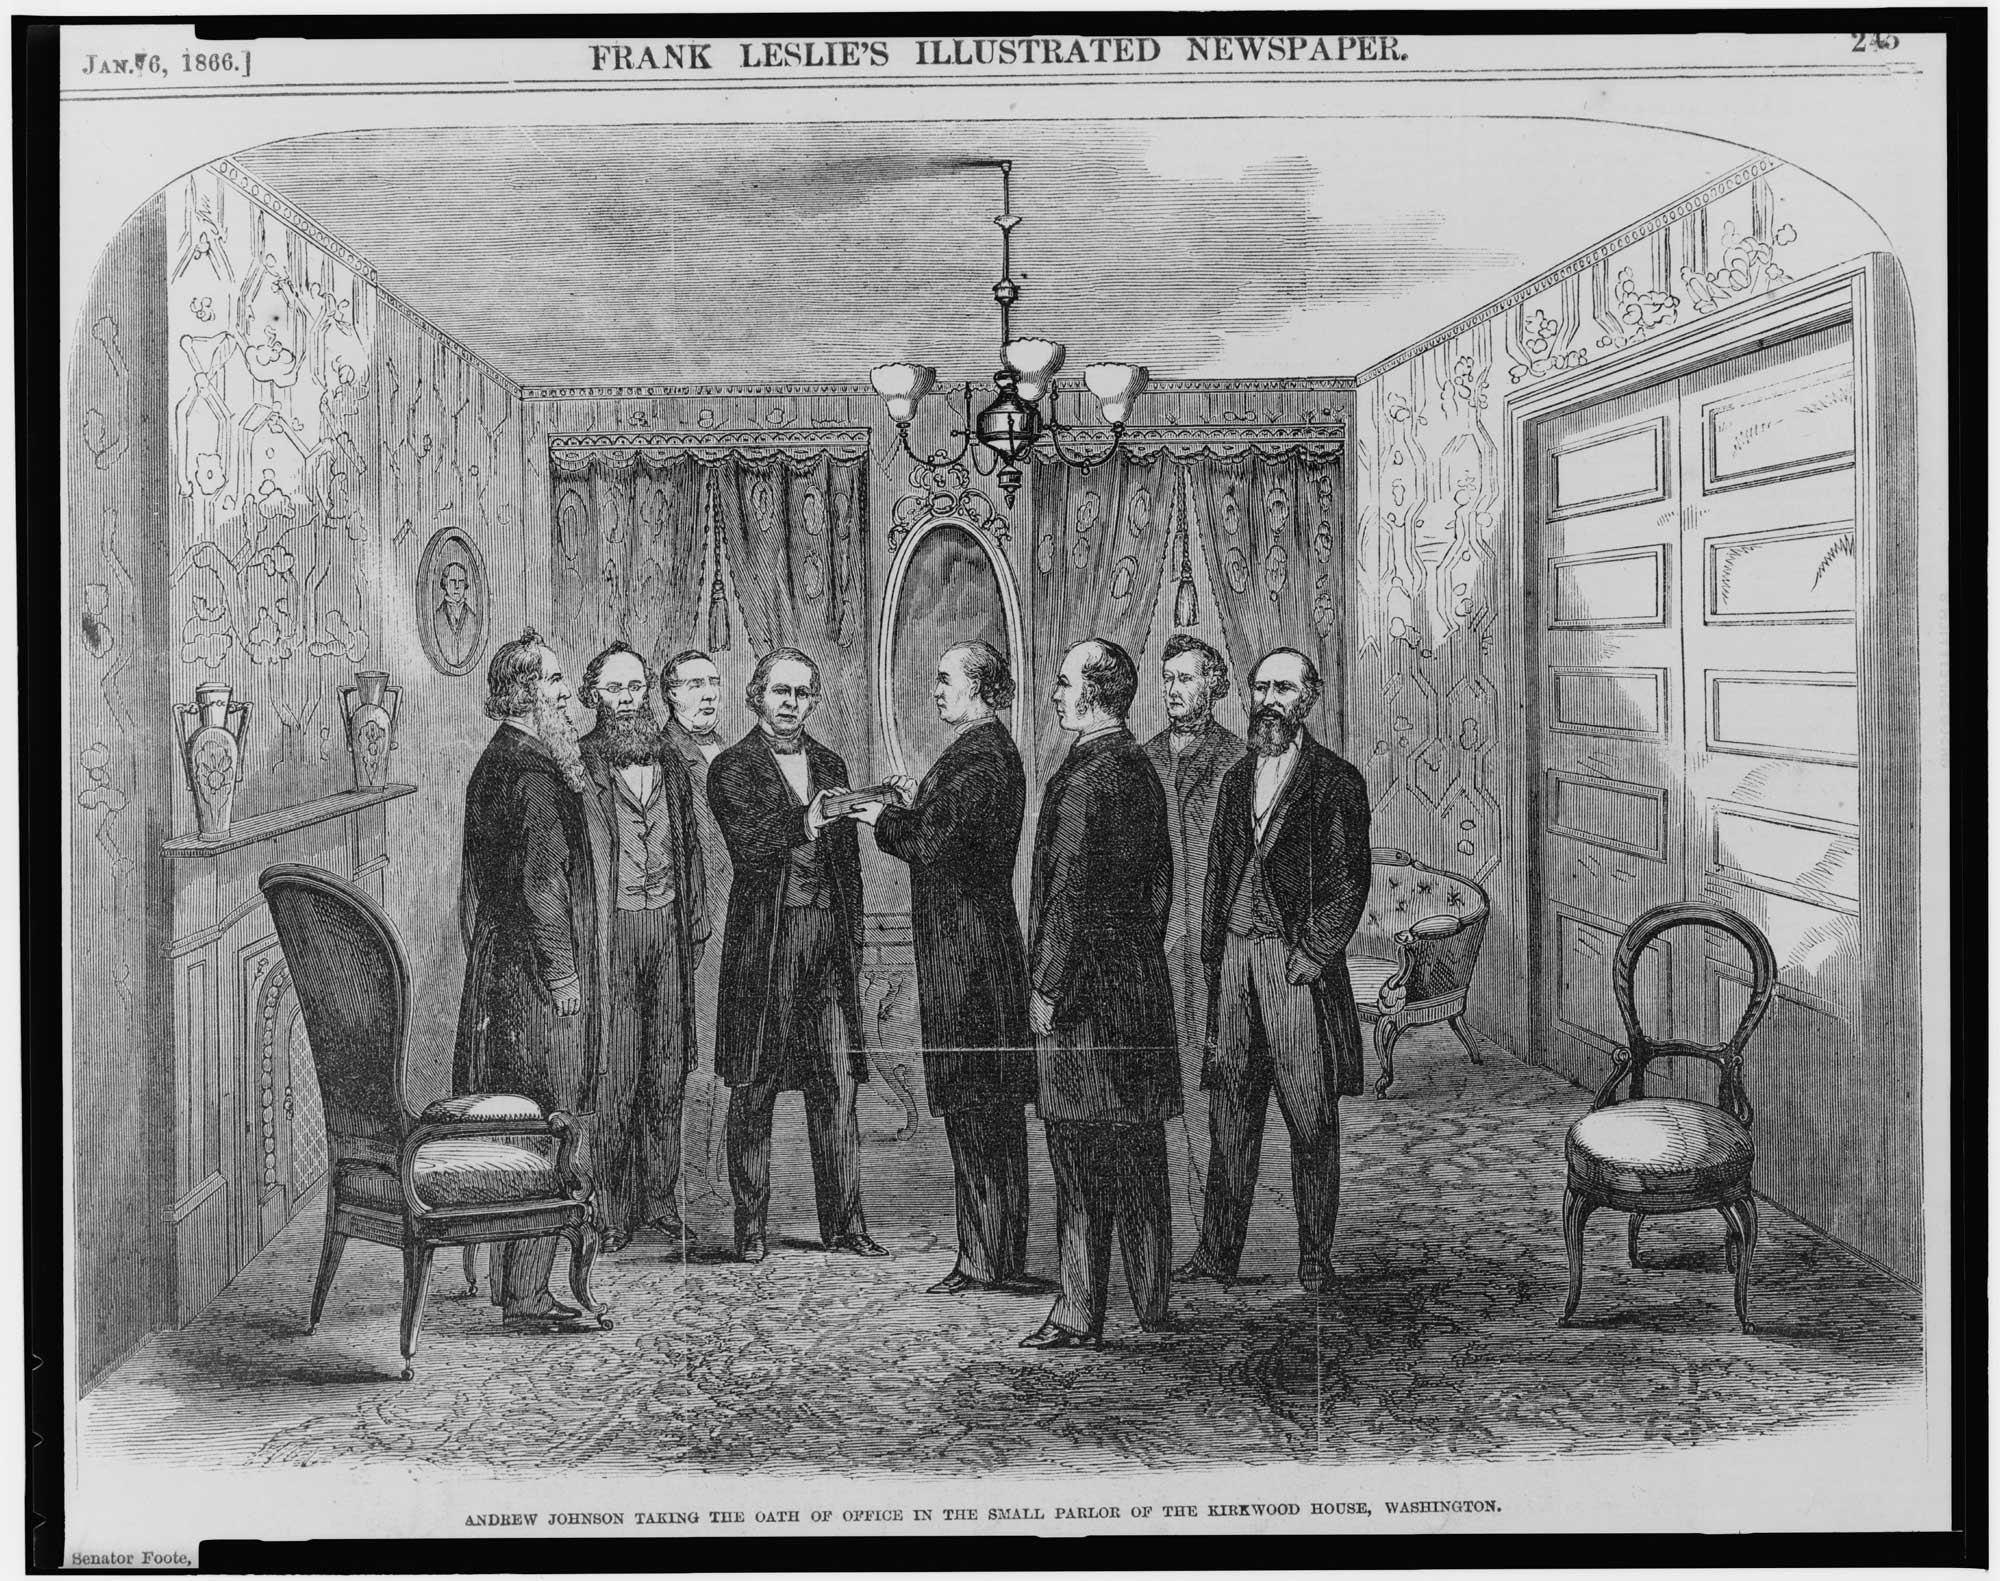 Pencil drawing of a group of men in suits standing together in the room and talking.